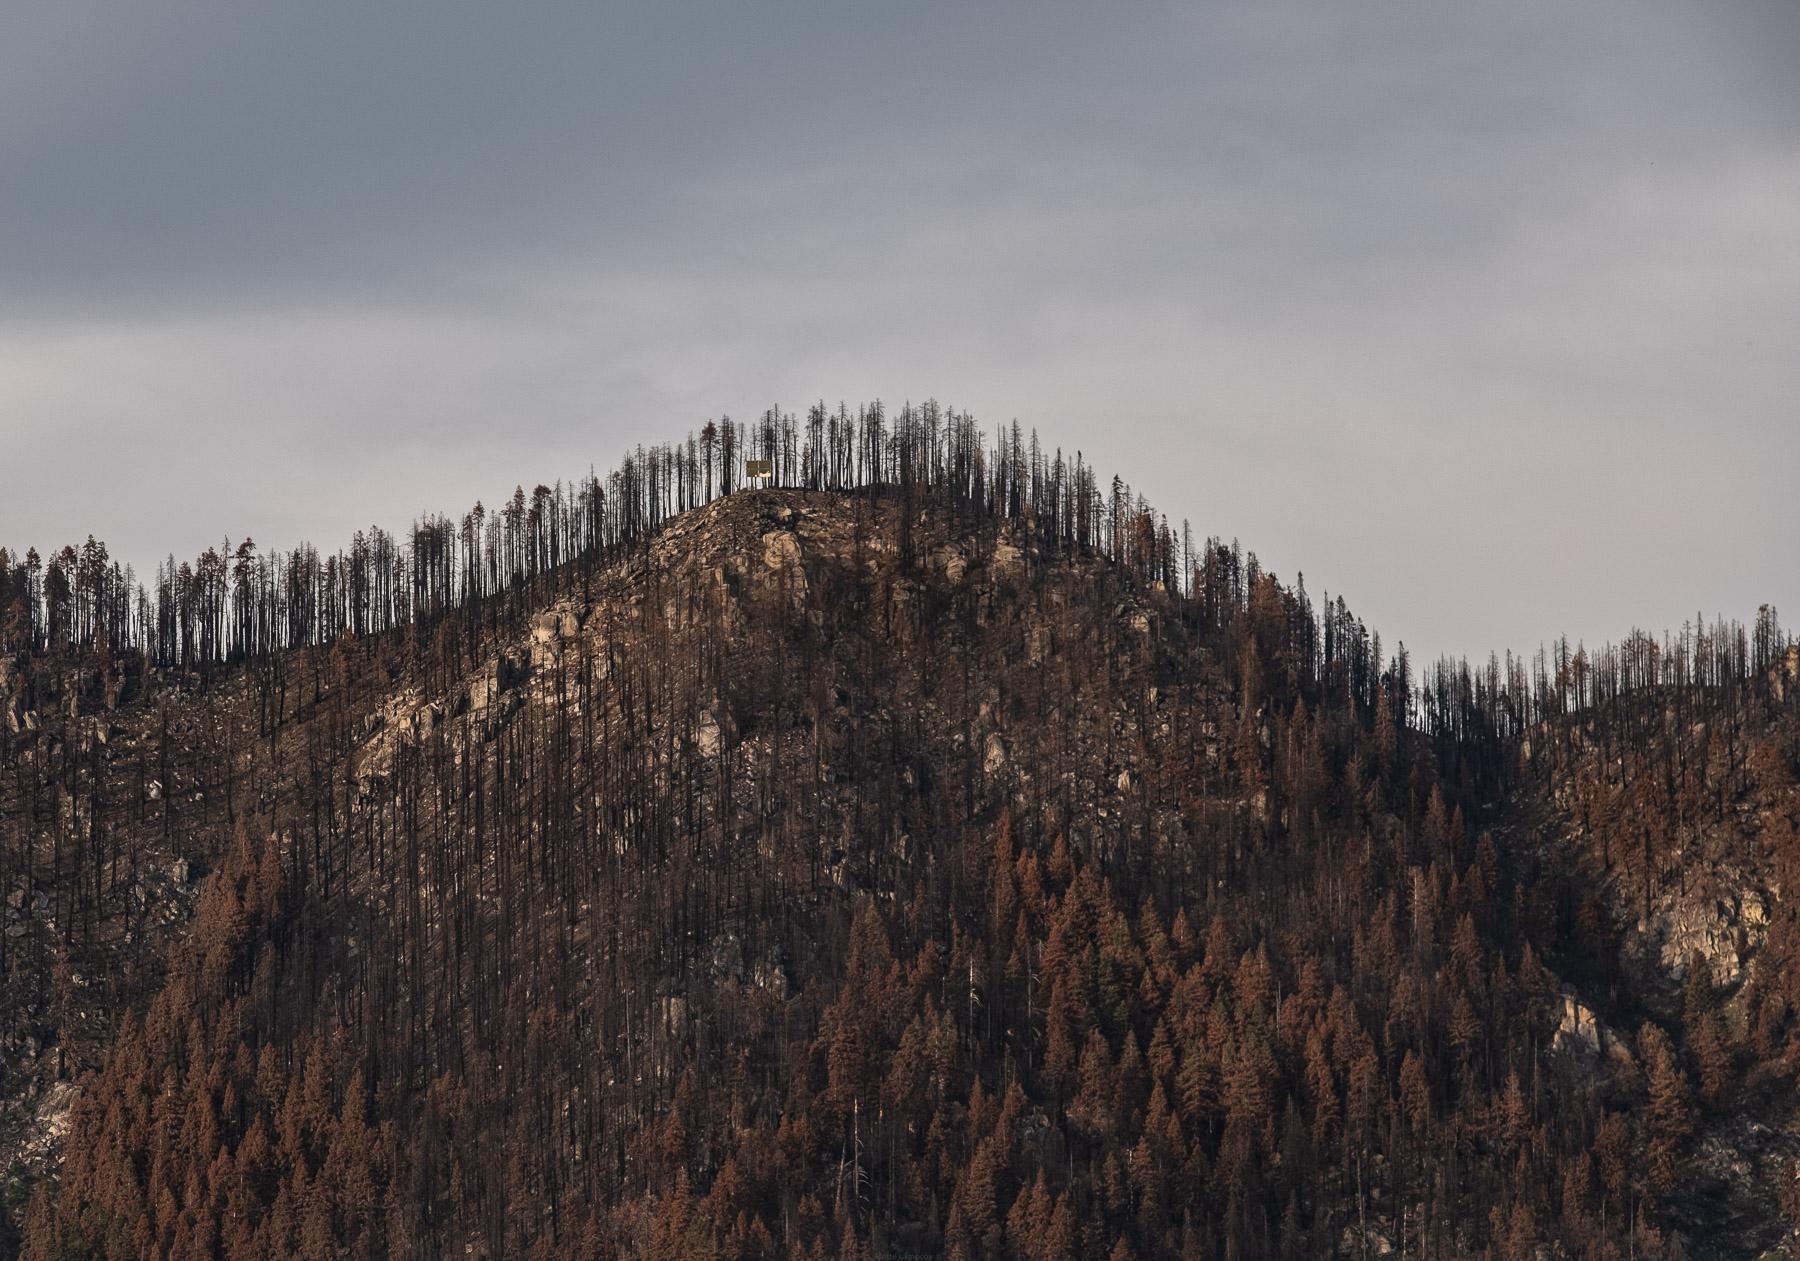 - Sequoia, a year in a burning forest - A mountain ridge in Sequoia National Forest burned by the...